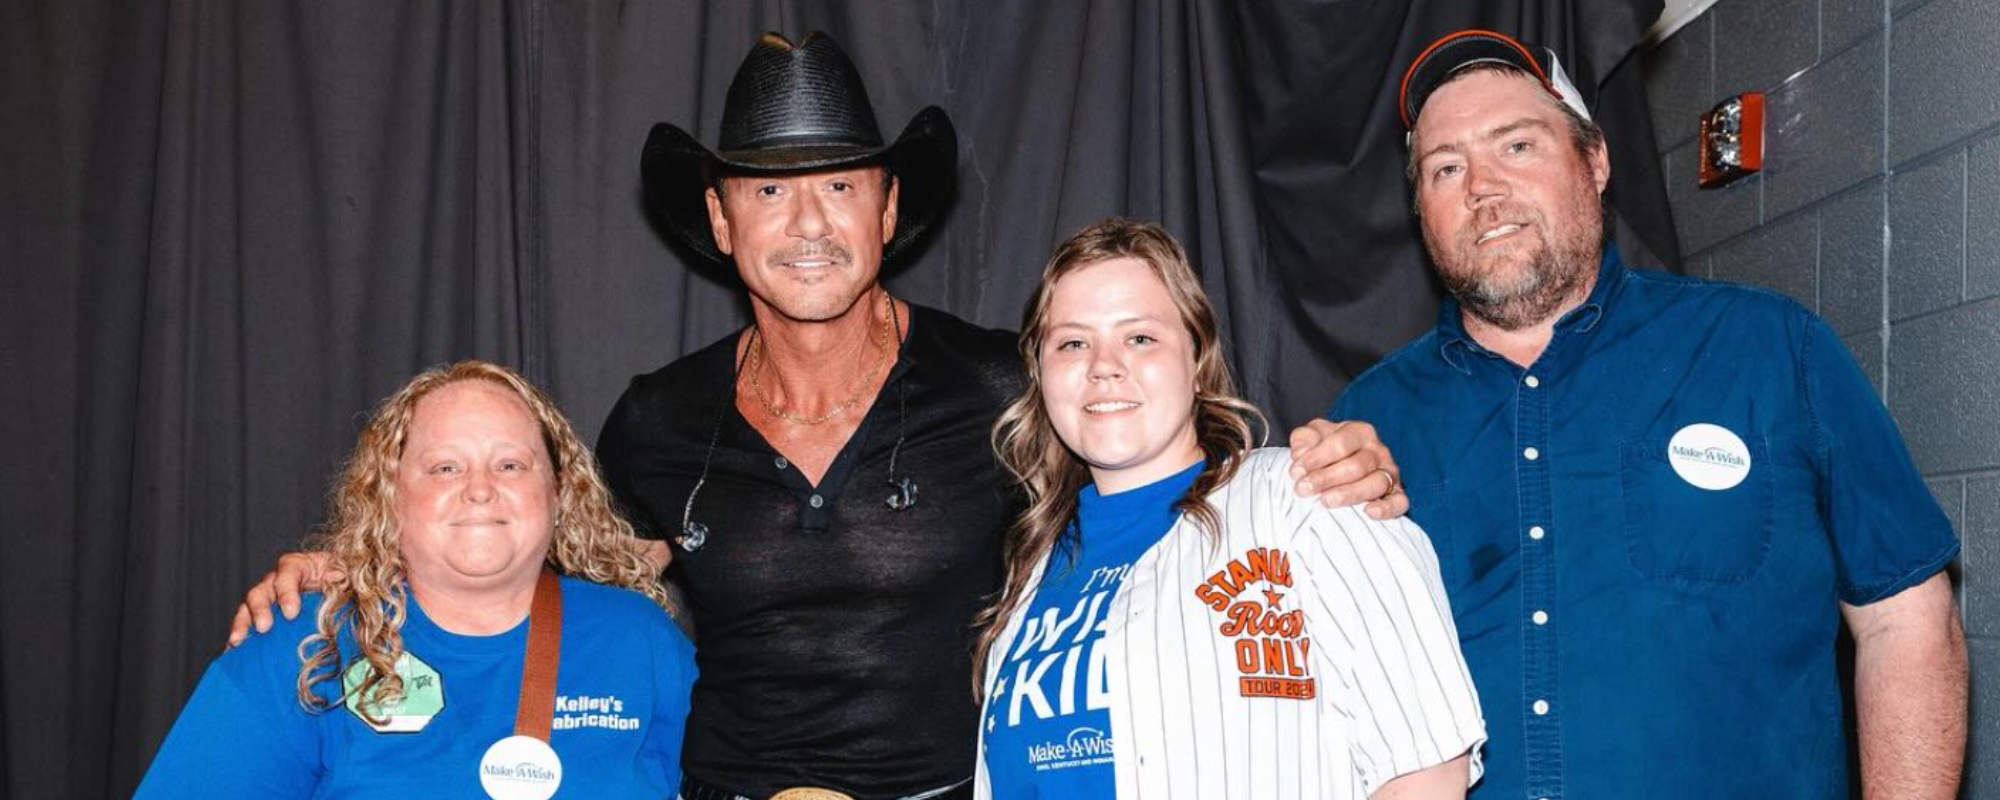 Tim McGraw Hopped in His Truck and Drove Three Hours To Make Sure Make-A-Wish Girl’s Dream Came True